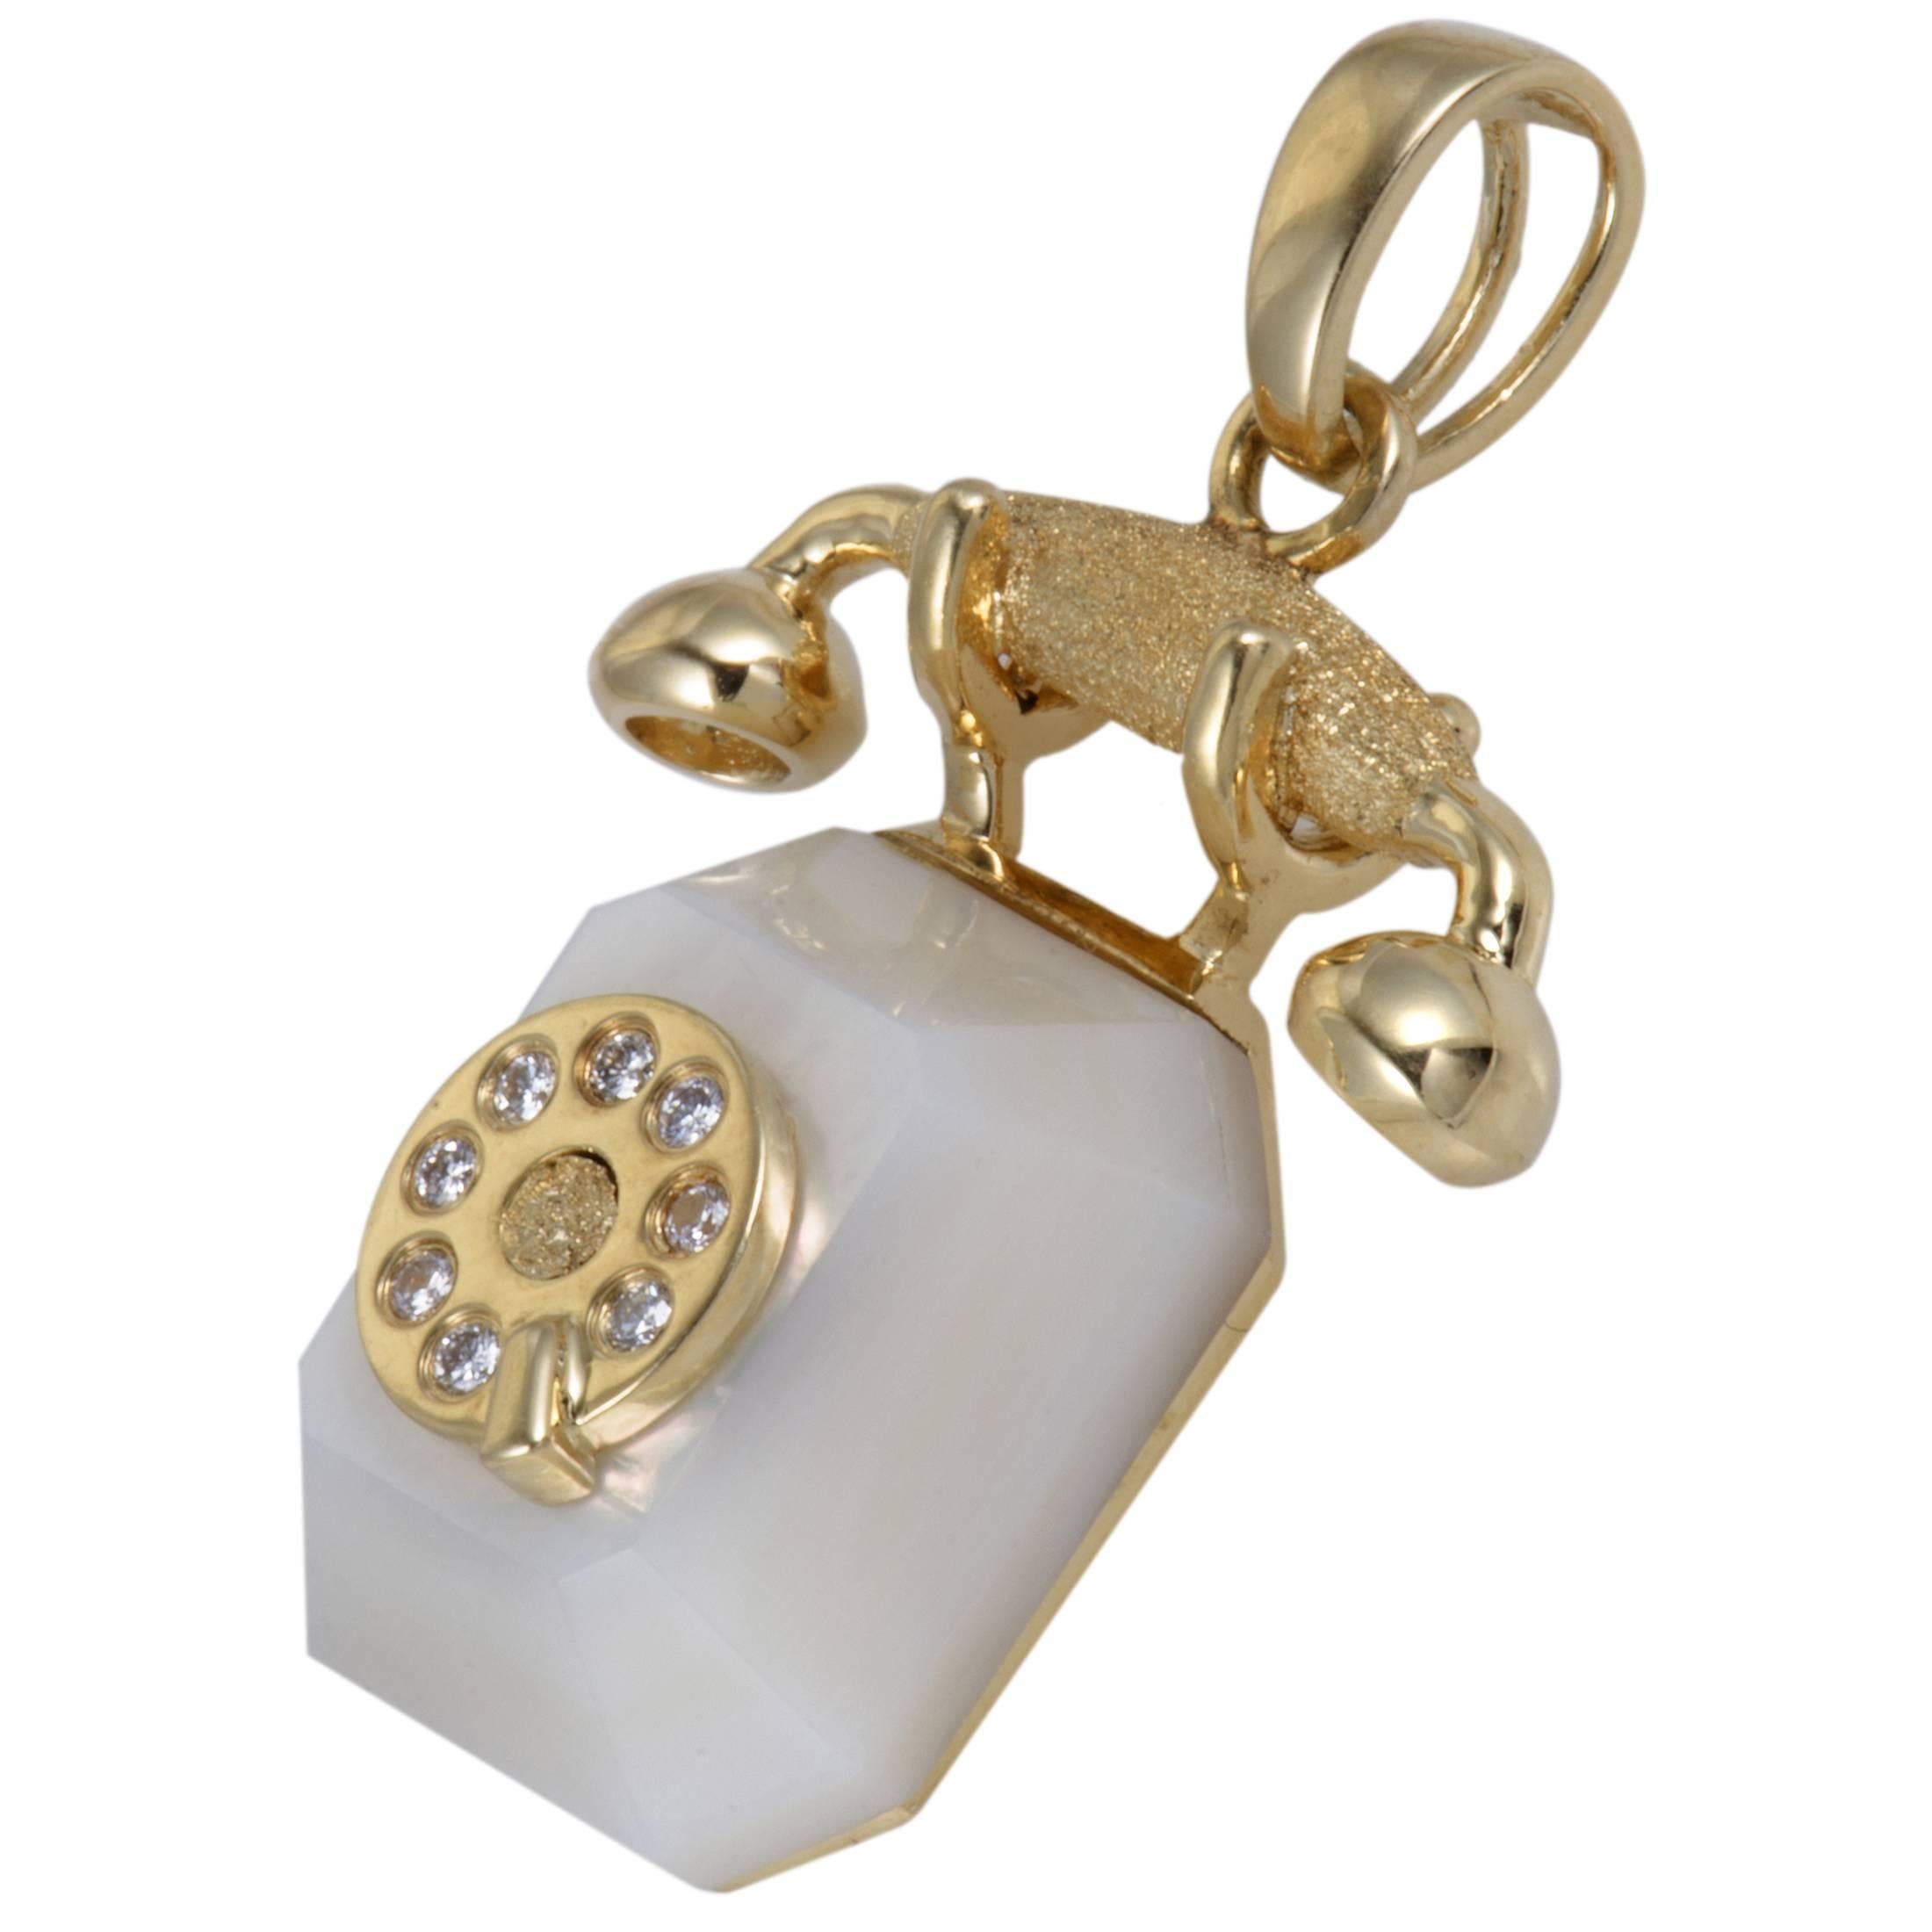 Gorgeously designed and wonderfully decorated, this splendid pendant boasts a nifty charming appeal. Made in shimmering 18K yellow gold in the shape of a rotary telephone, the incredible pendant is spectacularly embellished in the ever elegant